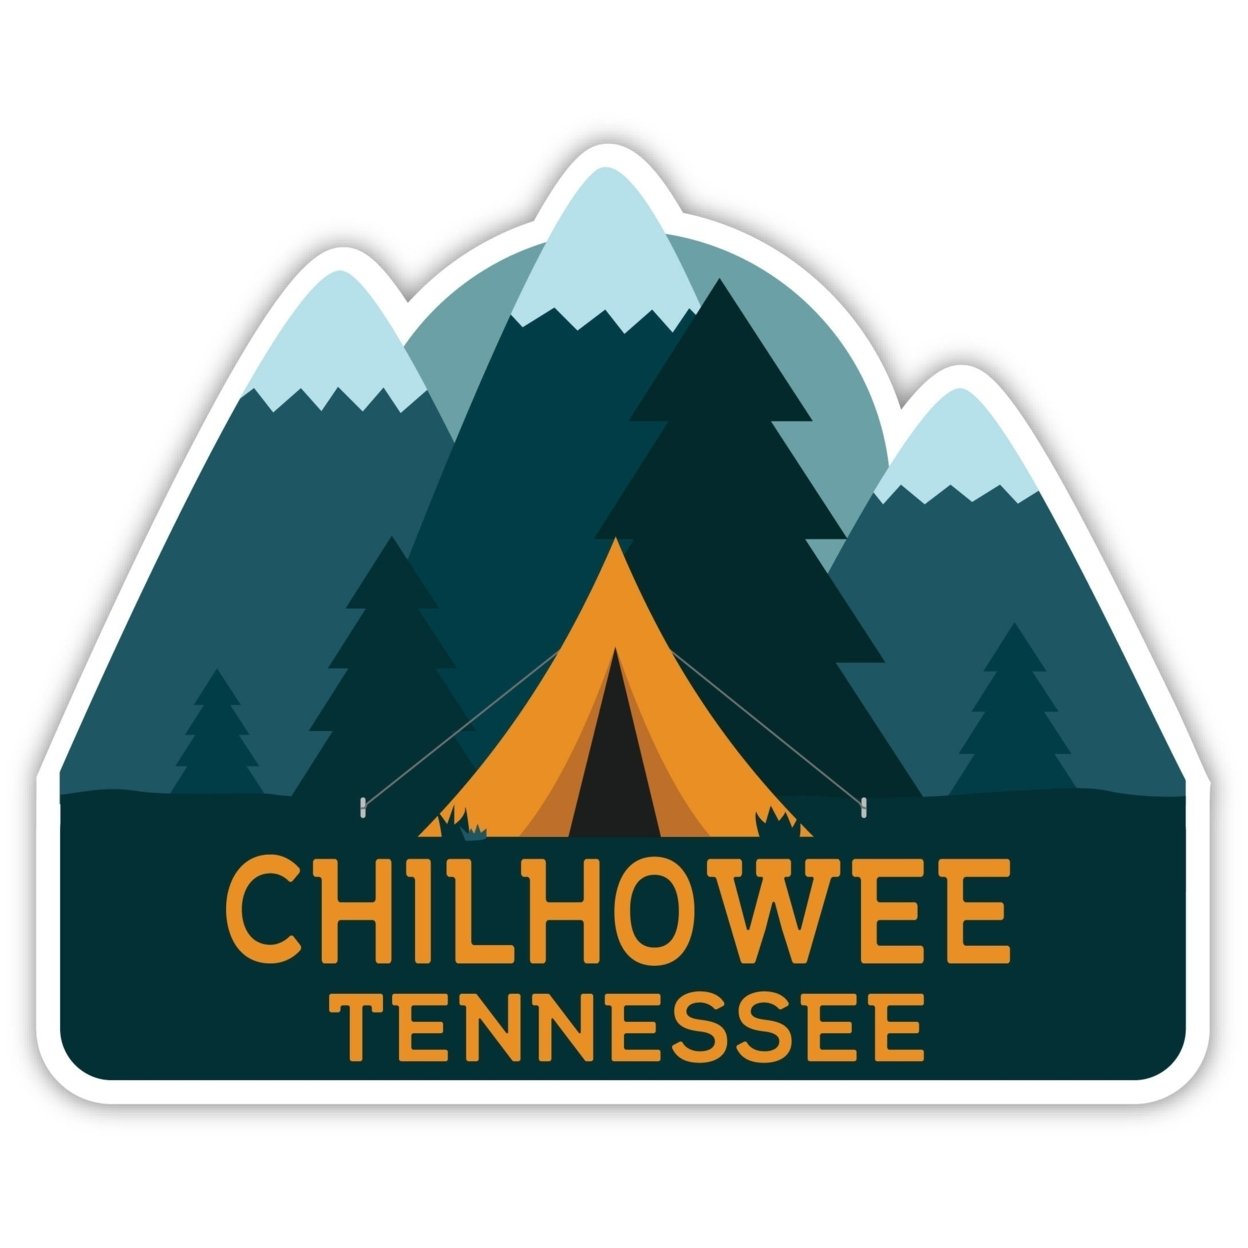 Chilhowee Tennessee Souvenir Decorative Stickers (Choose Theme And Size) - Single Unit, 12-Inch, Camp Life